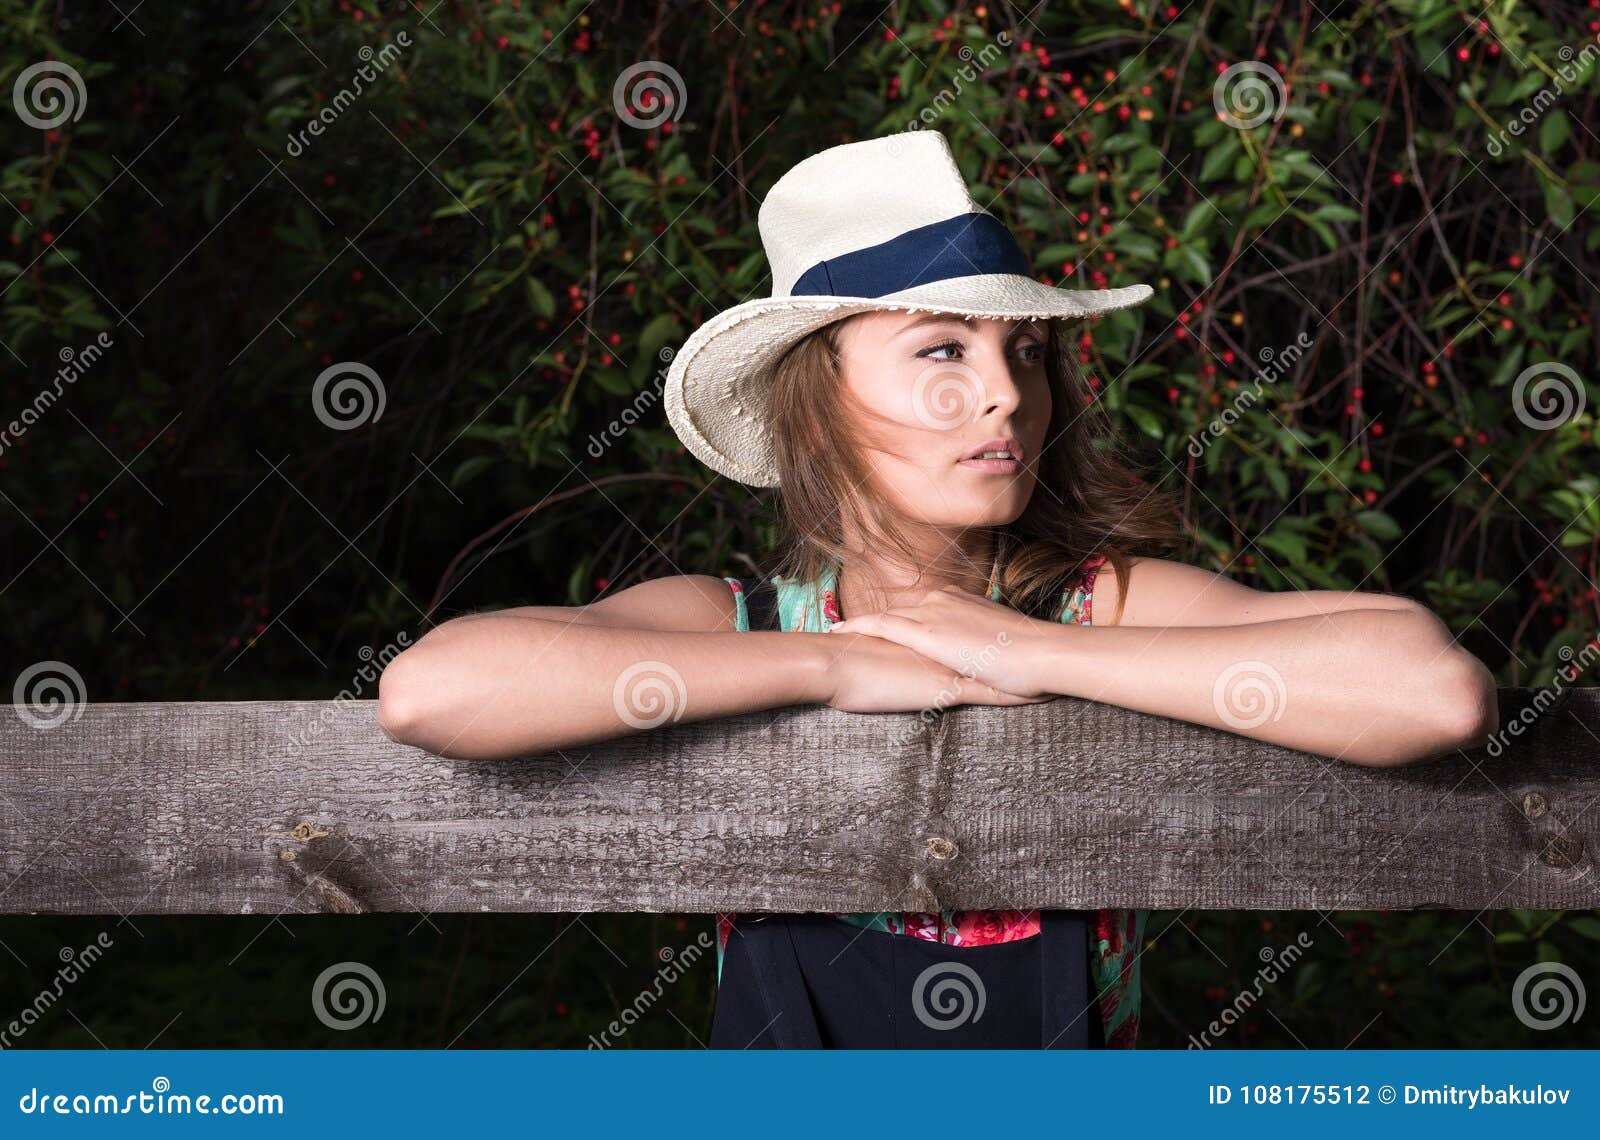 Dark Portrait of a Young Attractive Woman Near a Wooden Fence Stock ...